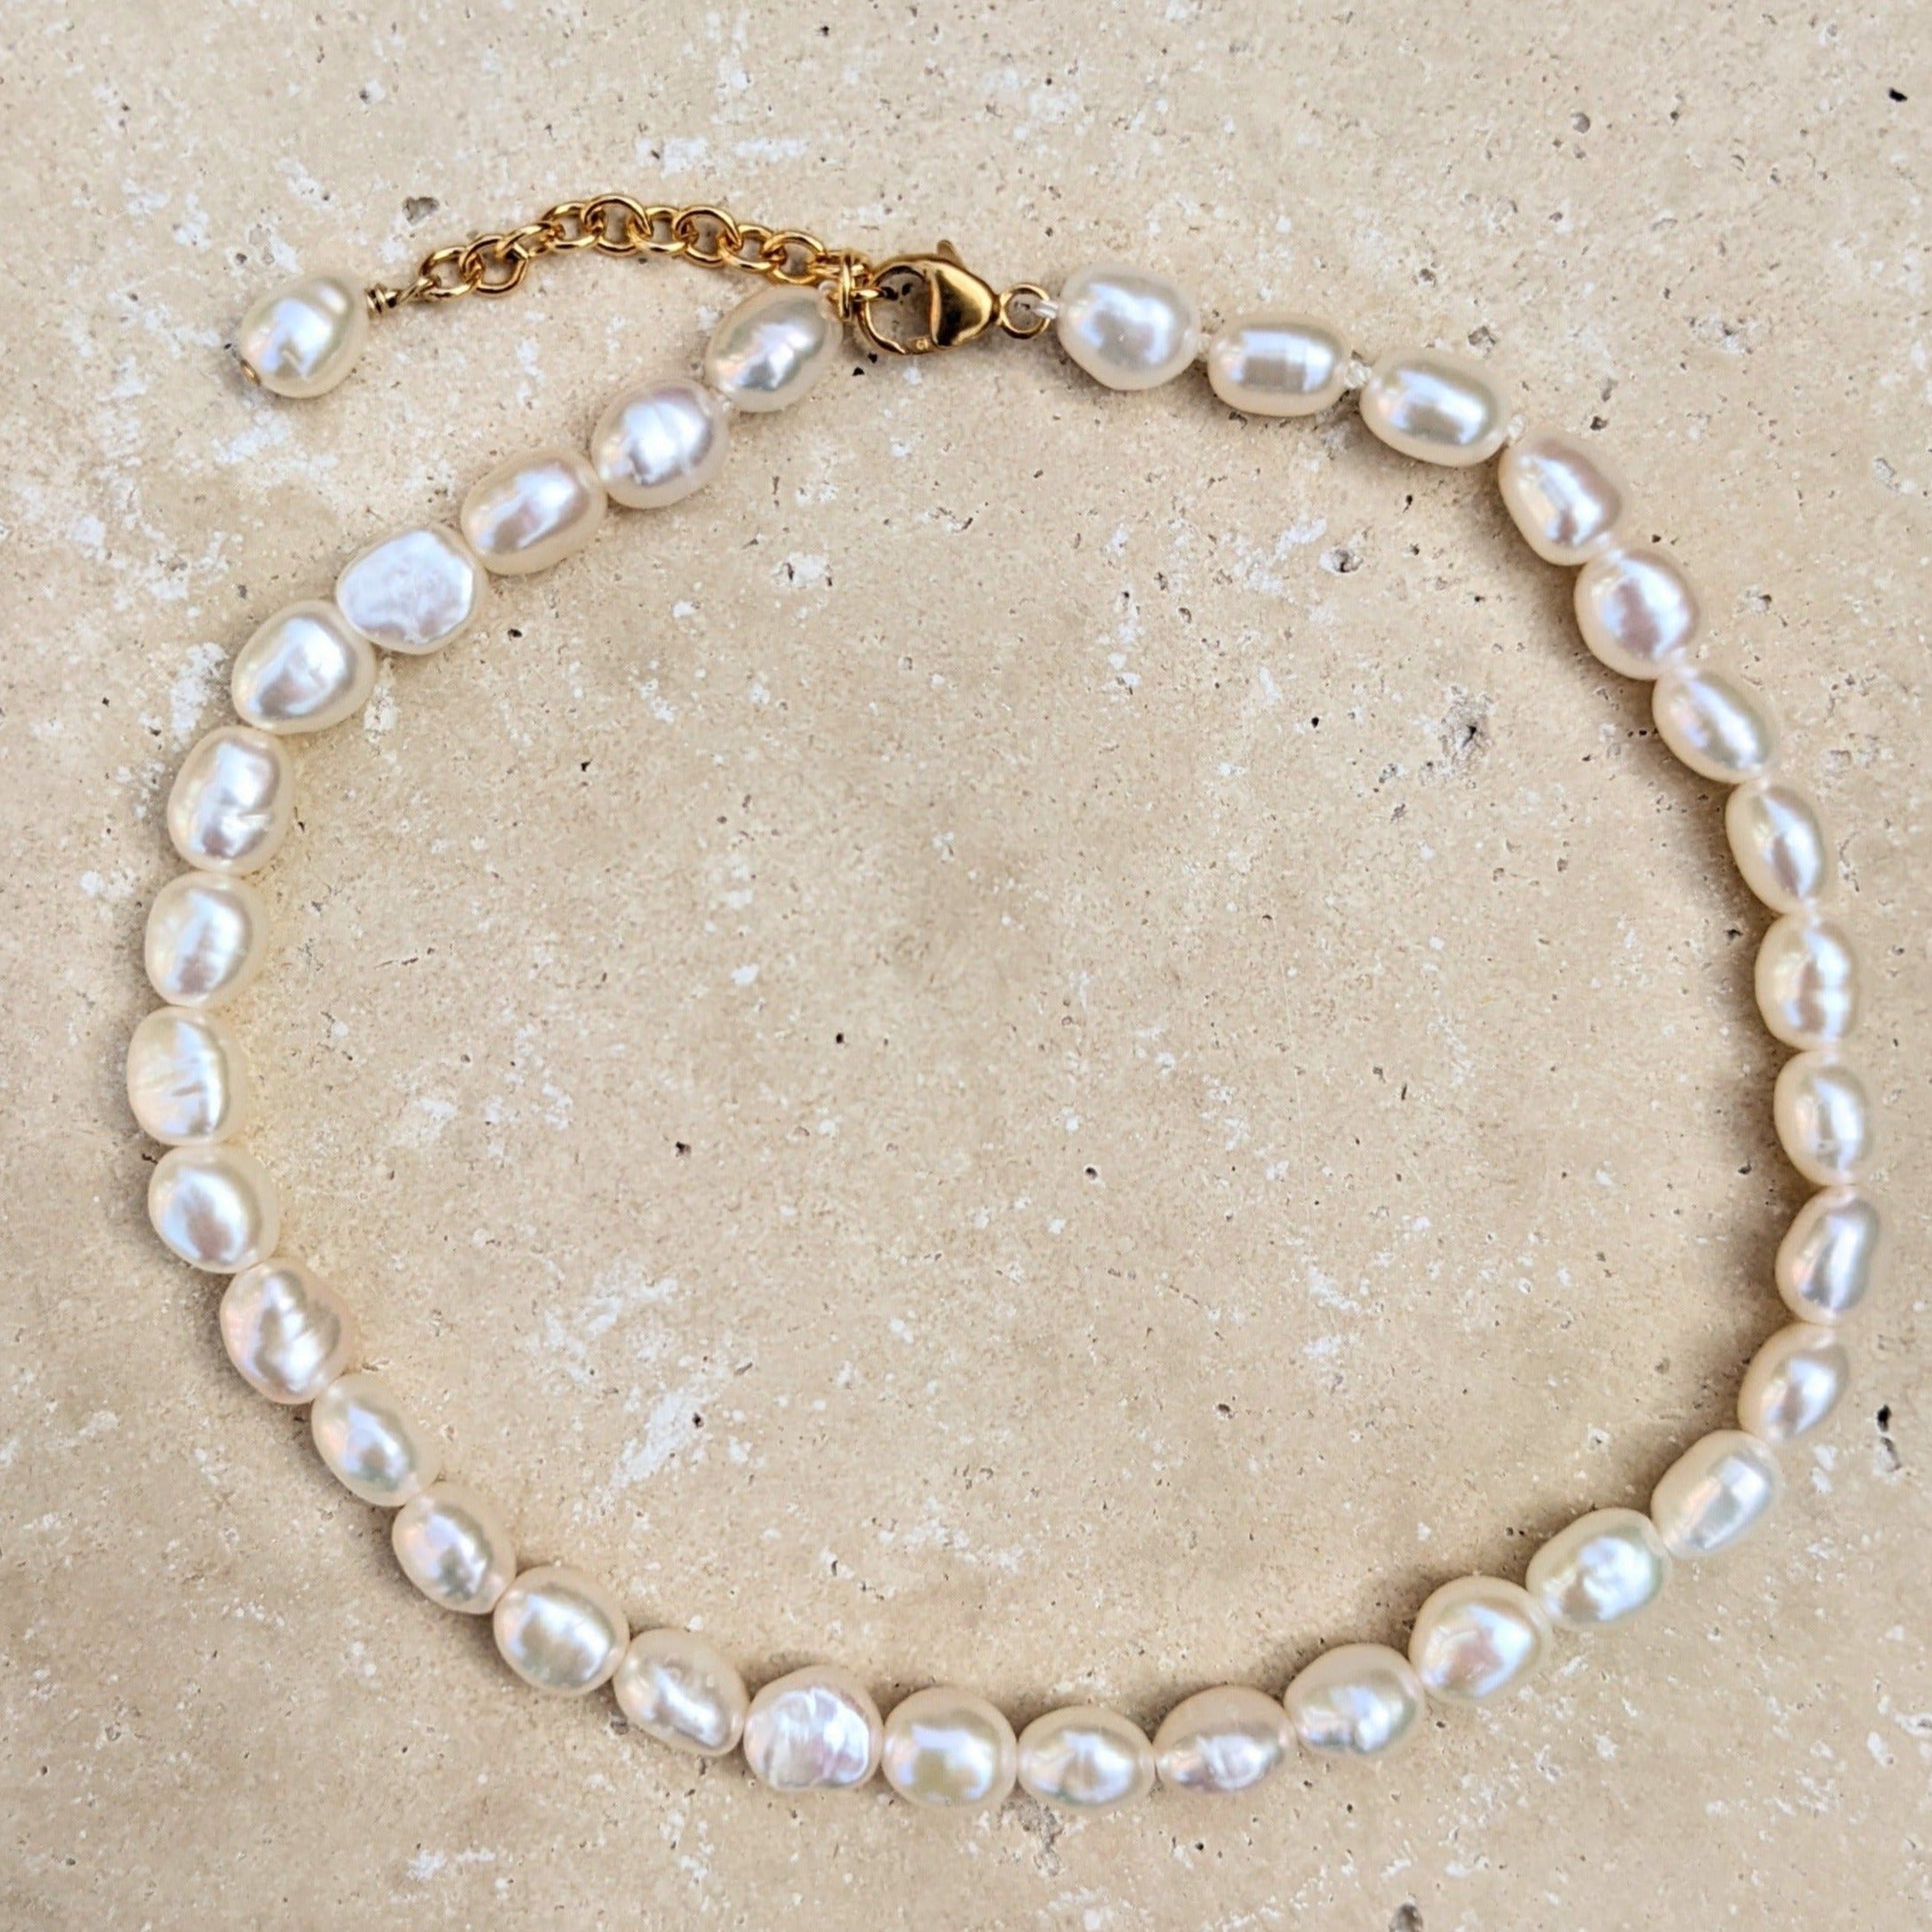 All baroque pearl anklet with gold filled clasp and adjustable chain